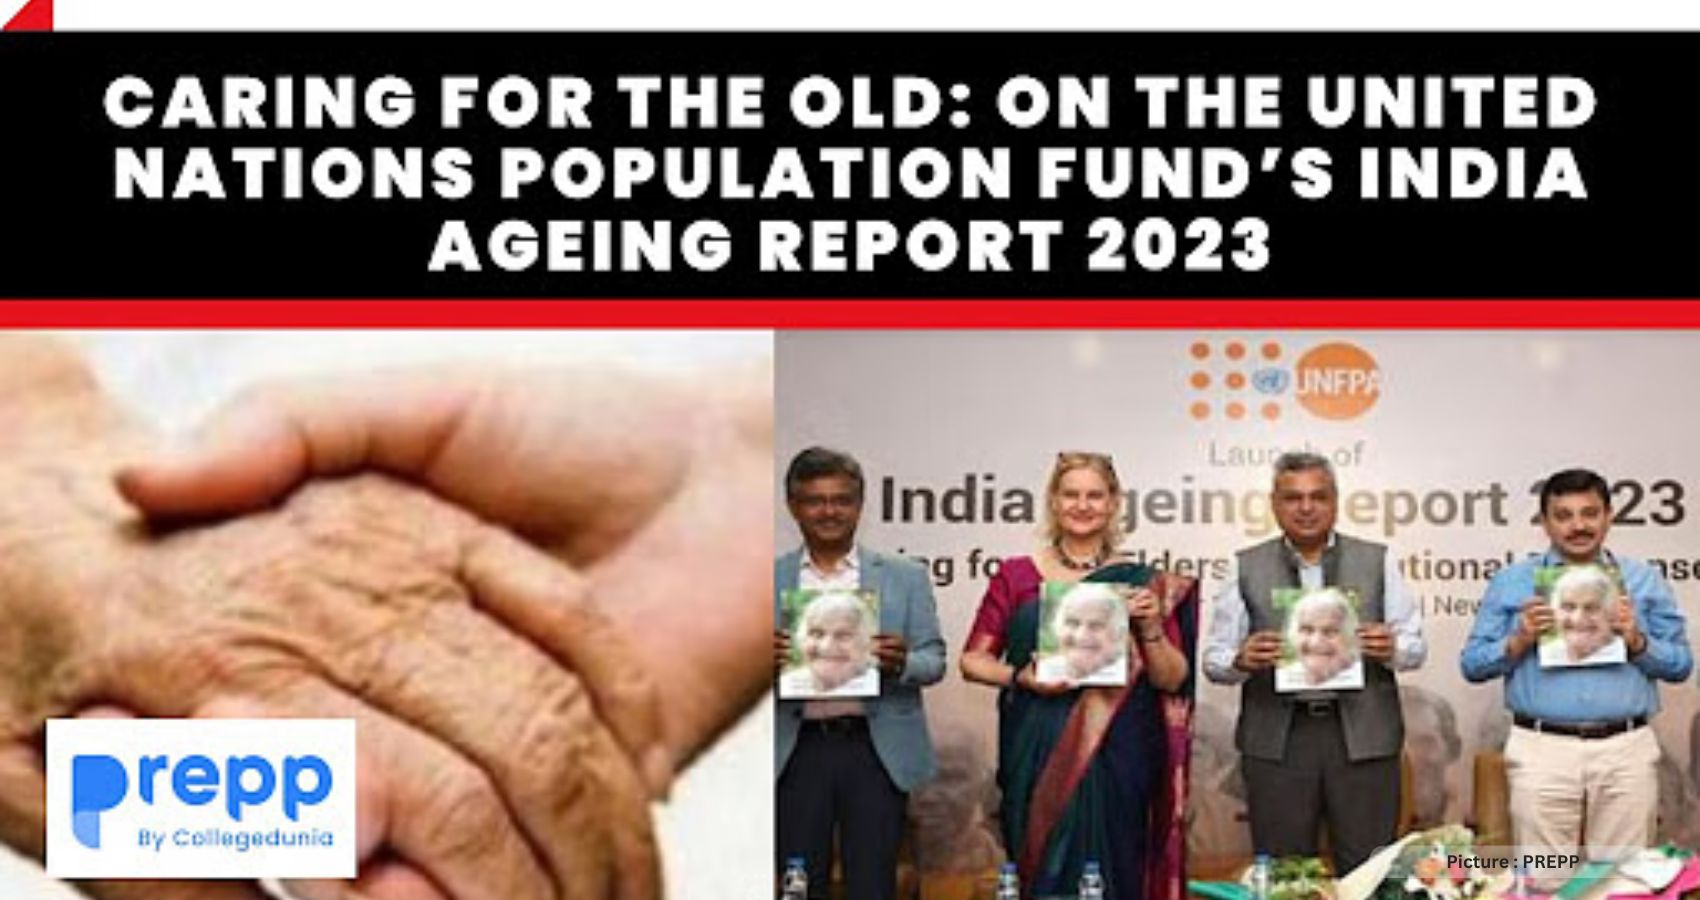 Caring for the Old: On the United Nations Population Fund’s India Ageing Report 2023